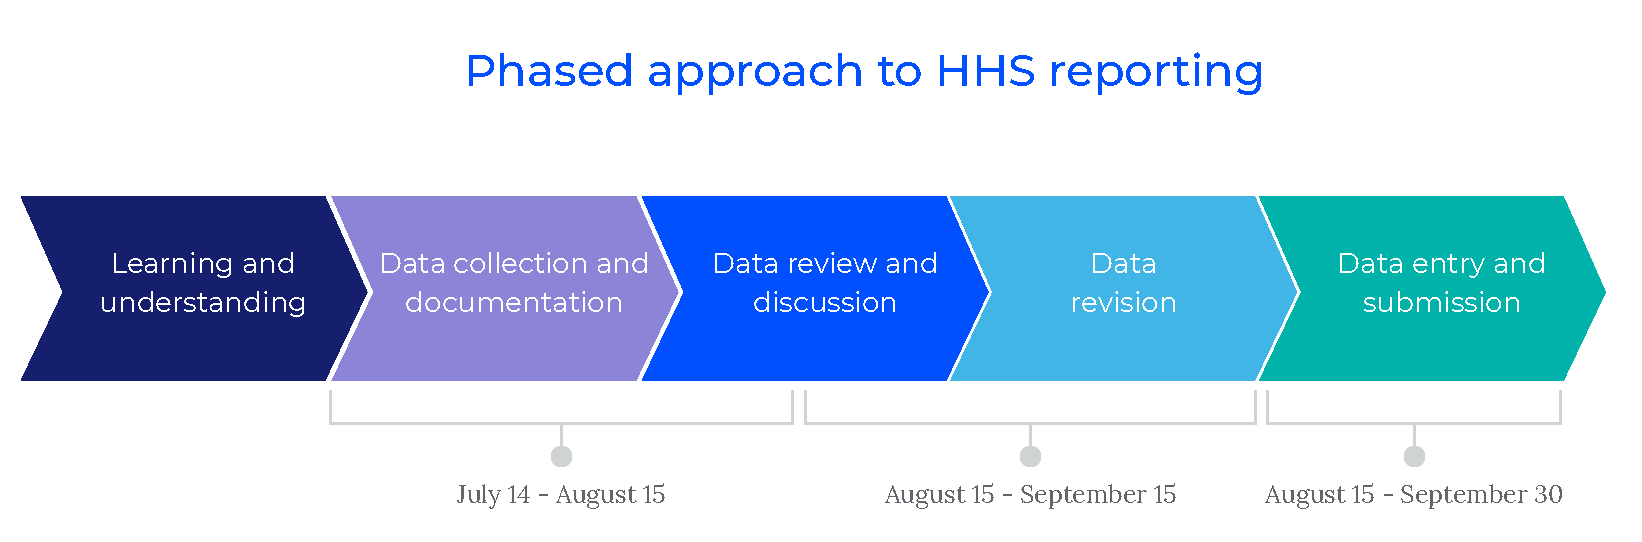 Phased approach to HHS reporting